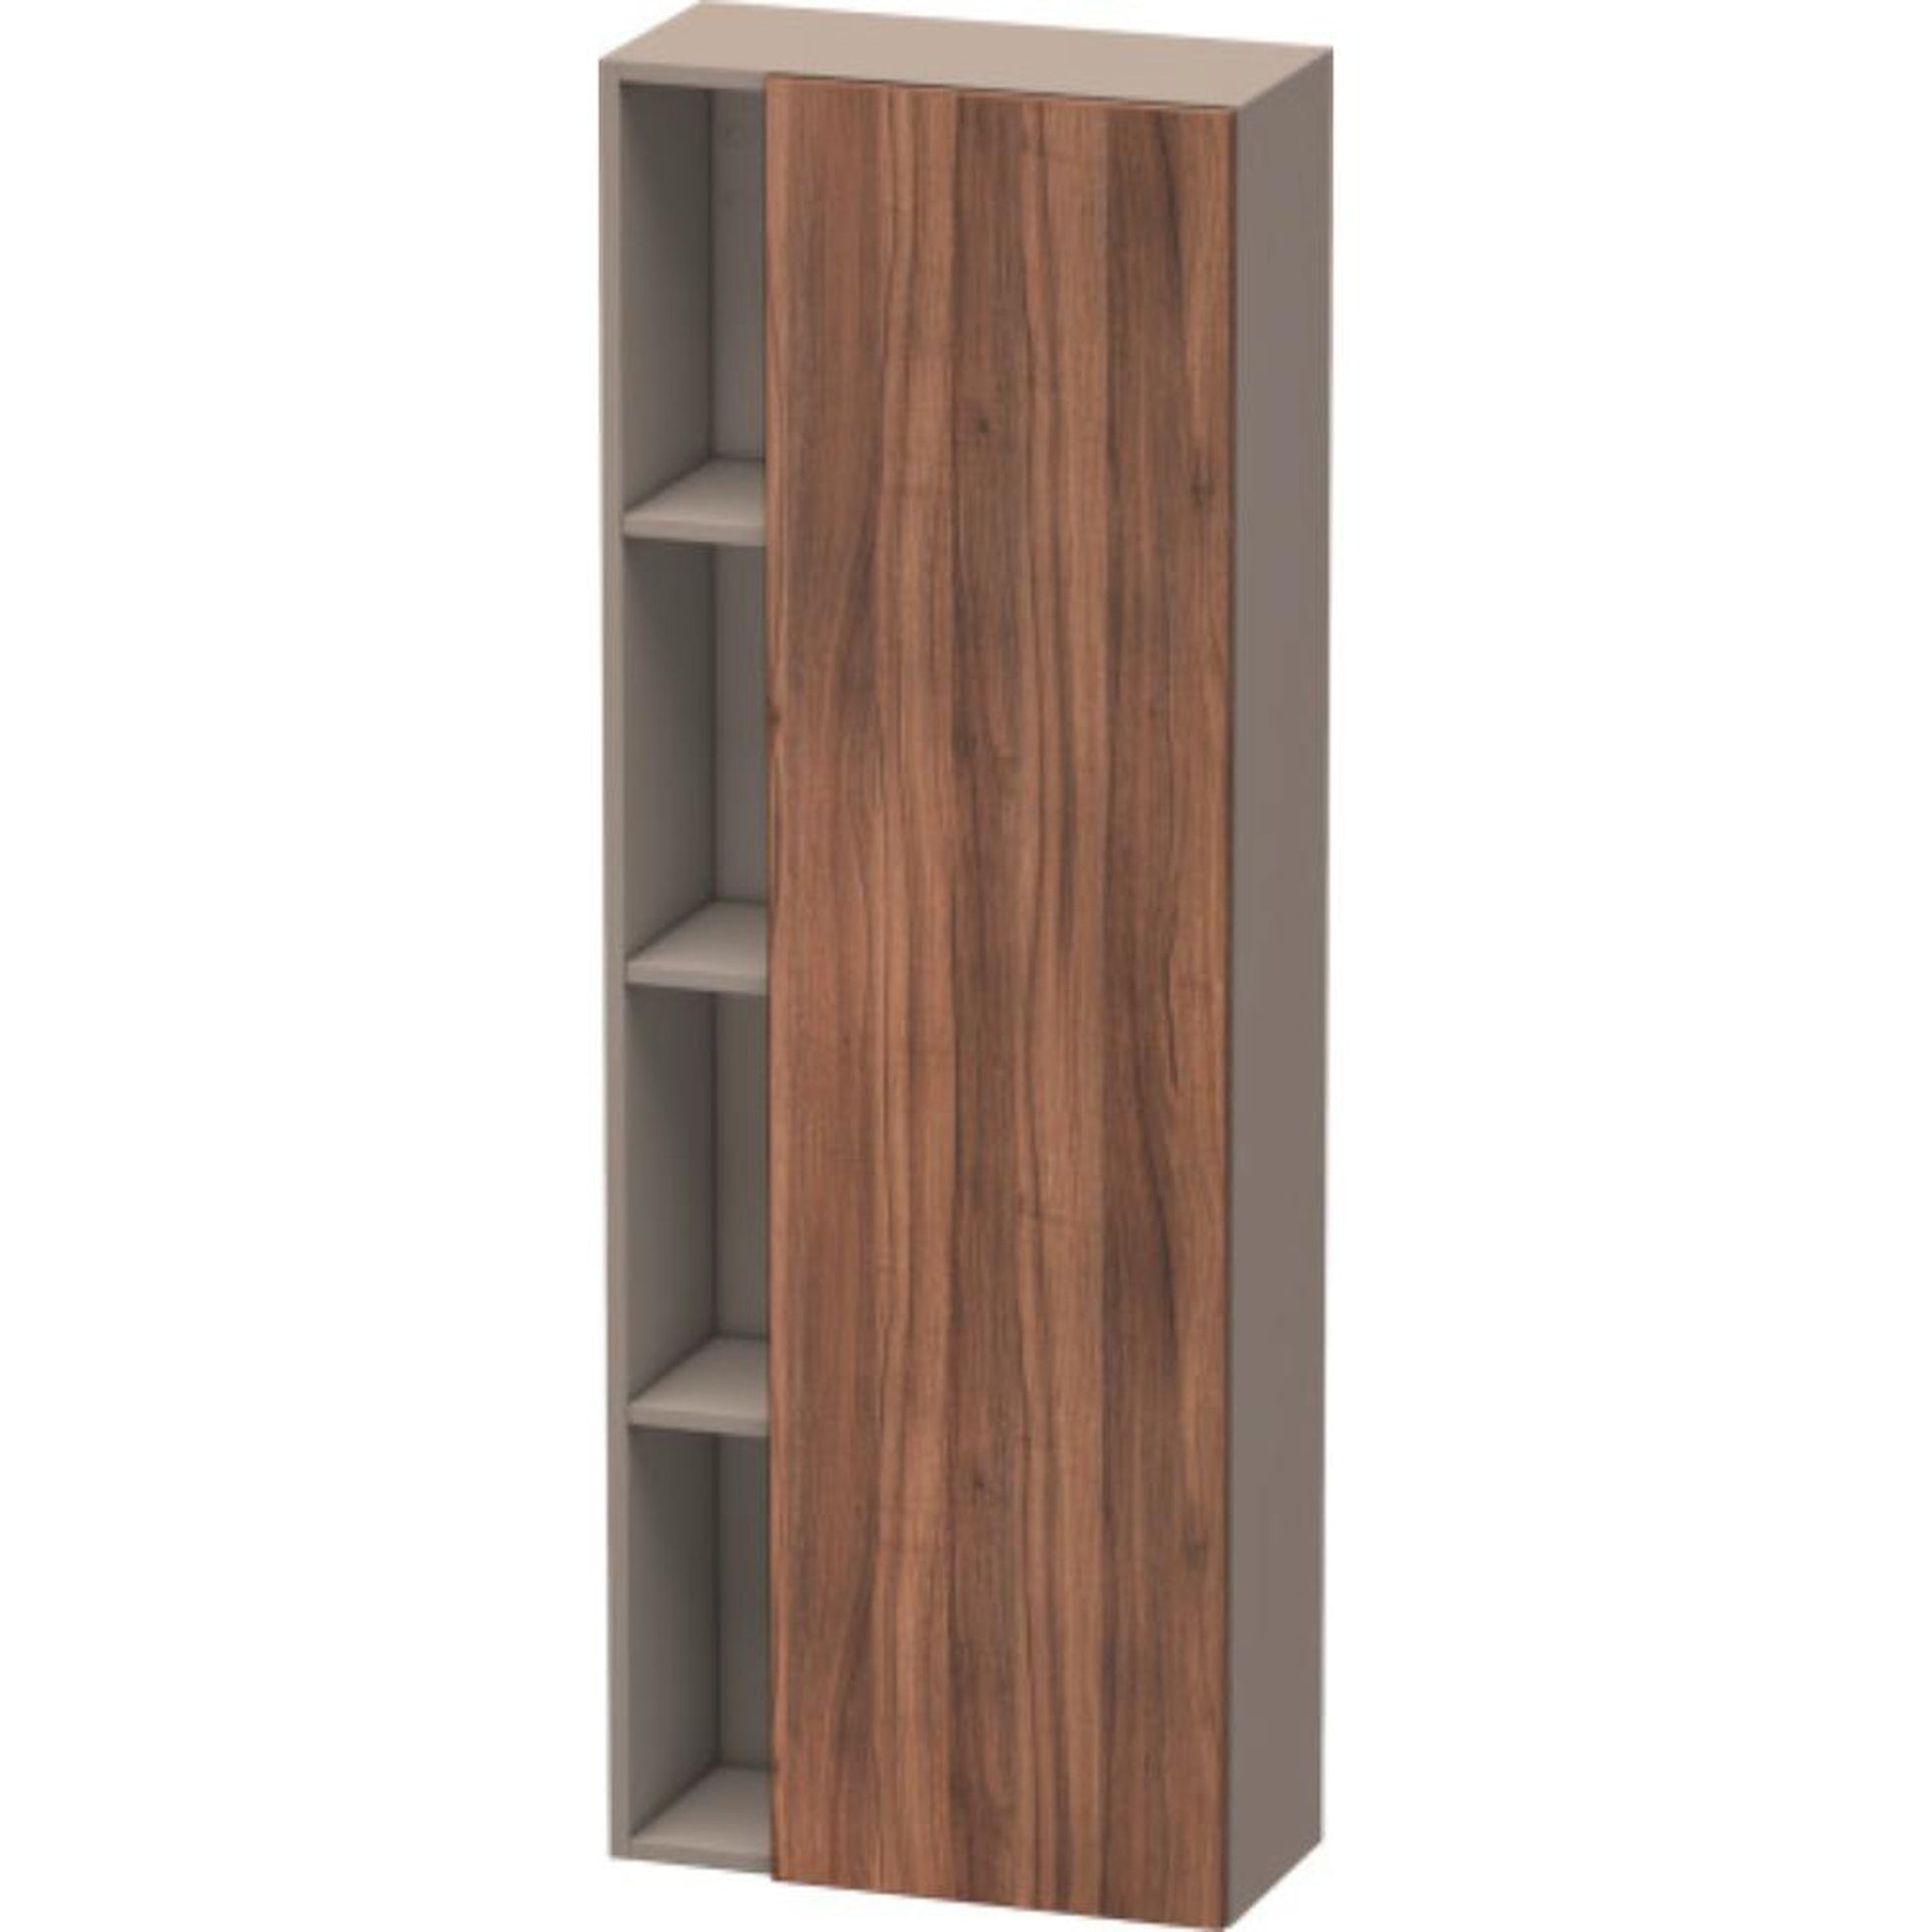 Duravit DuraStyle 20" x 55" x 9" Tall Cabinet With Right Hinge One Door in Natural Walnut and Basalt (DS1238R7943)